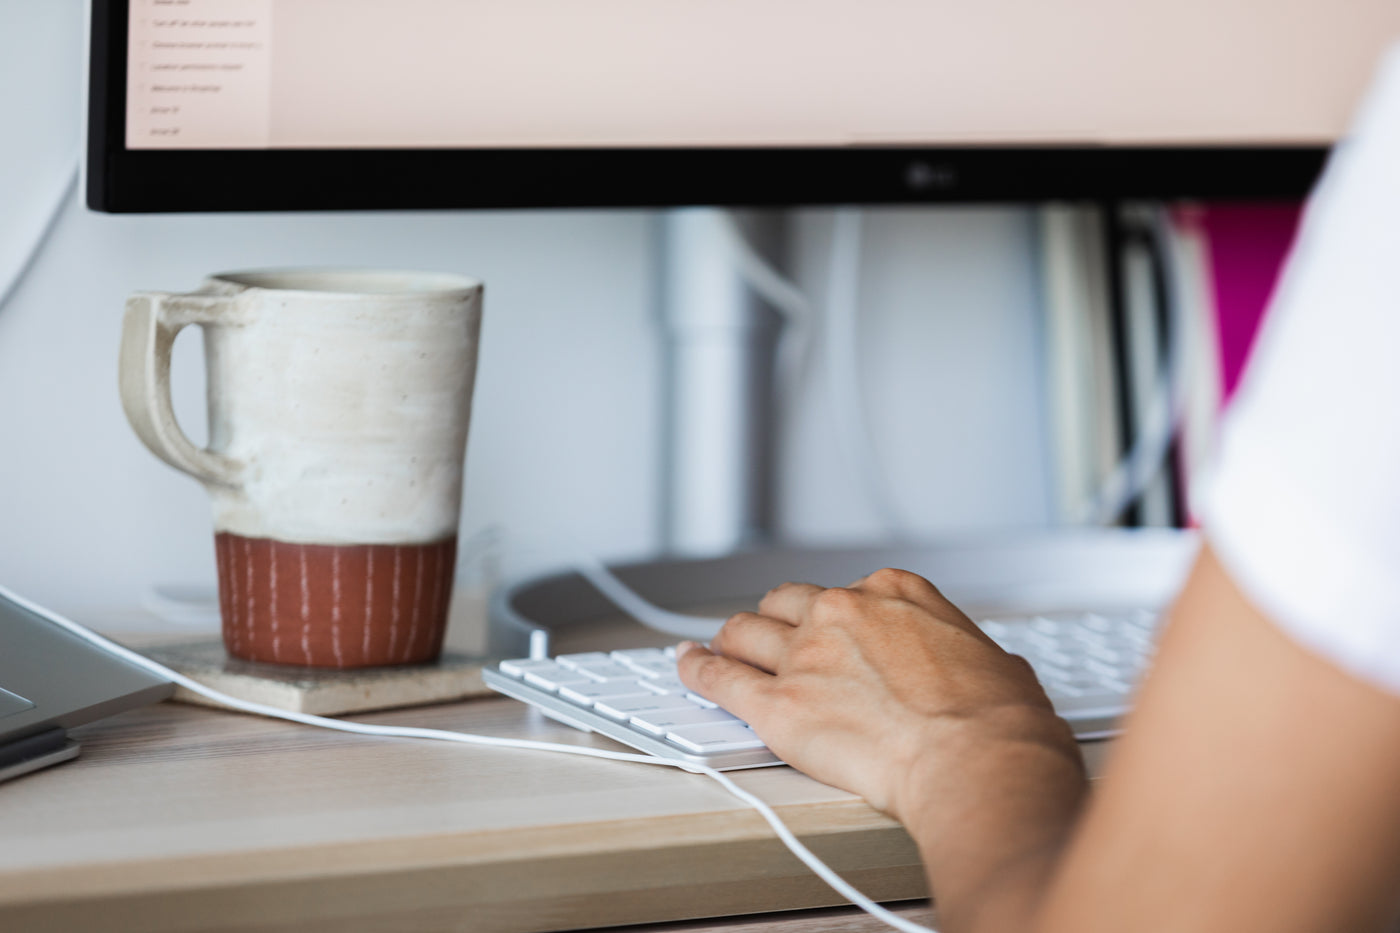 Lifestyle image of a close up of a person's hand on a keyboard. The bottom of a monitor is visible and there's a coffee cup on a coaster.